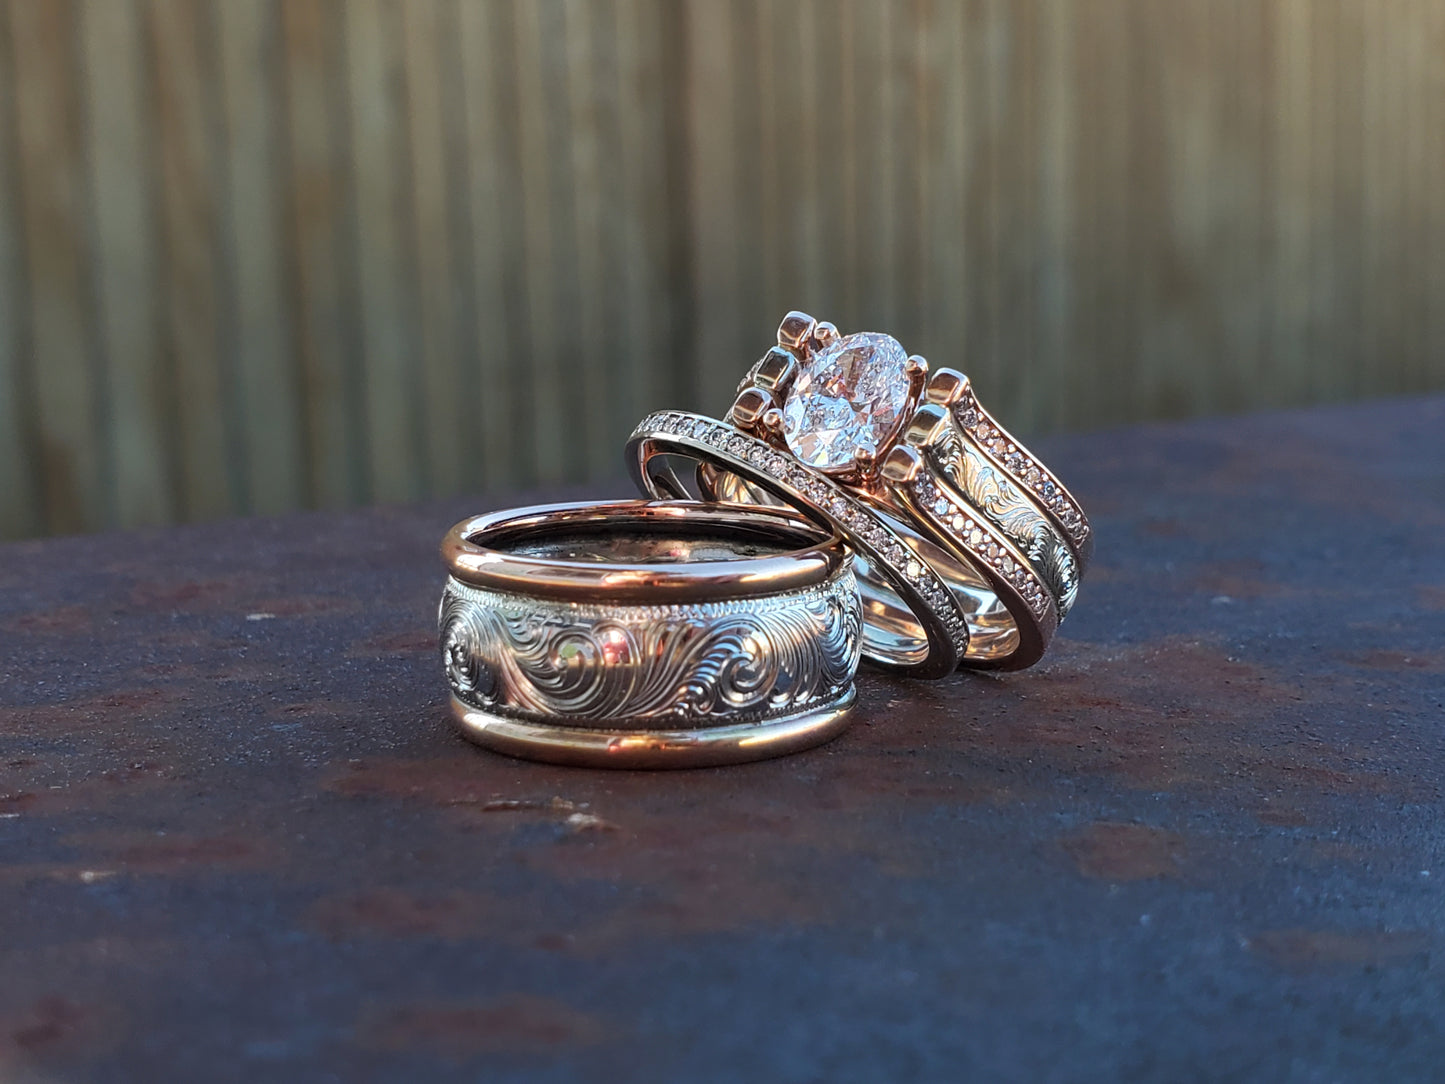 The Grayson: Rose Gold and Silver Band, Wedding Ring, Hand Engraved, Western Inspired Gift, Western Wedding Band, Hand-engraved Ring